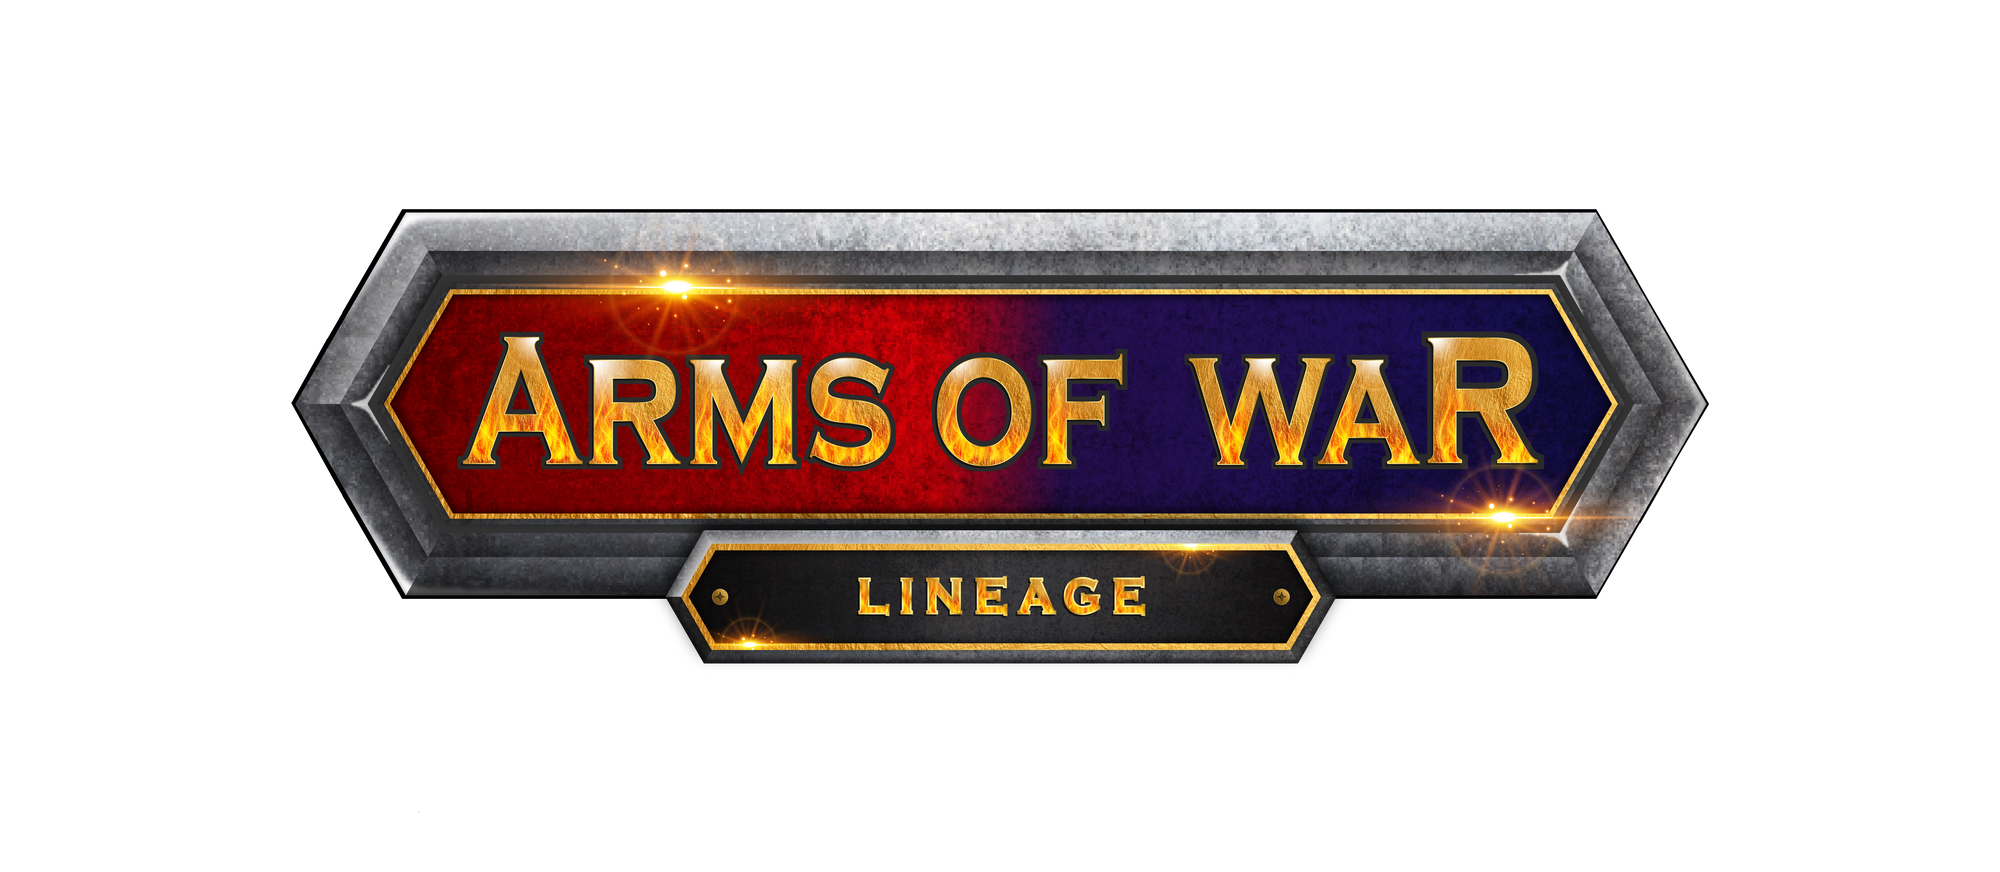 Arms of War (Generals, Lineage, Kings)